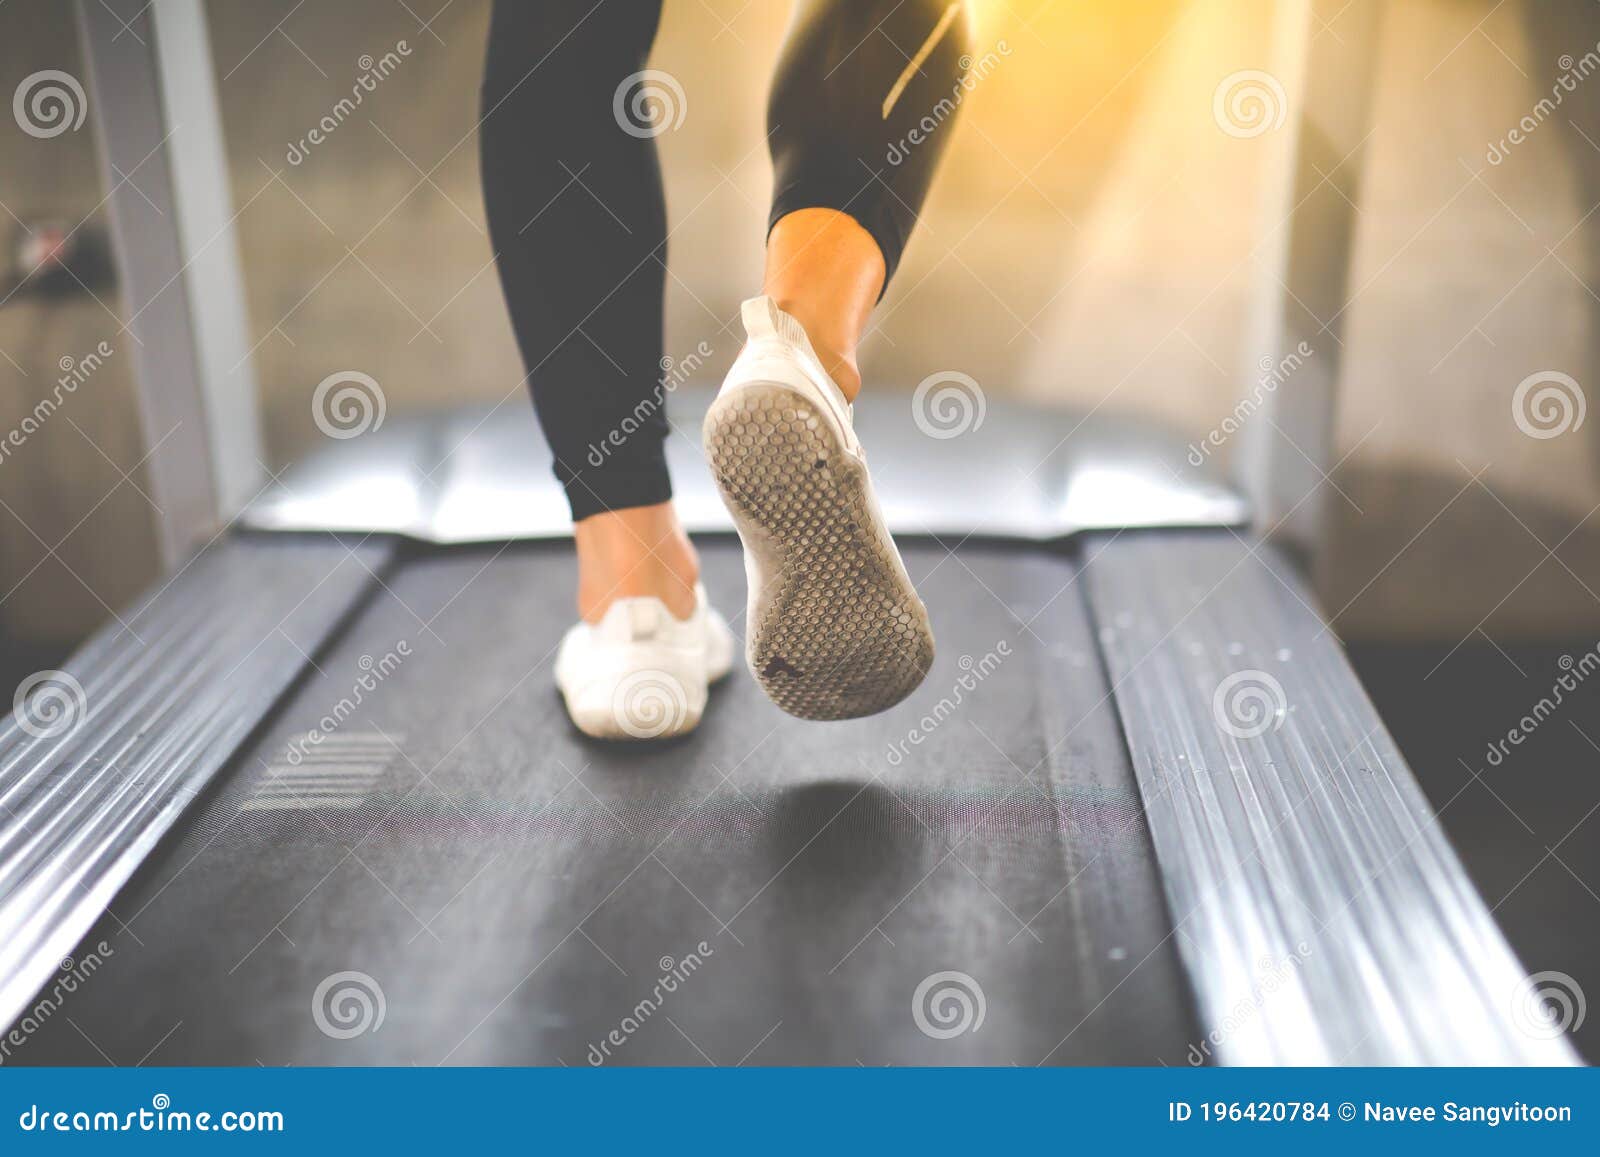 man running on treadmill  machine at gym sports club. fitness healthy lifestye and workout at gym concept. selective focus at mele